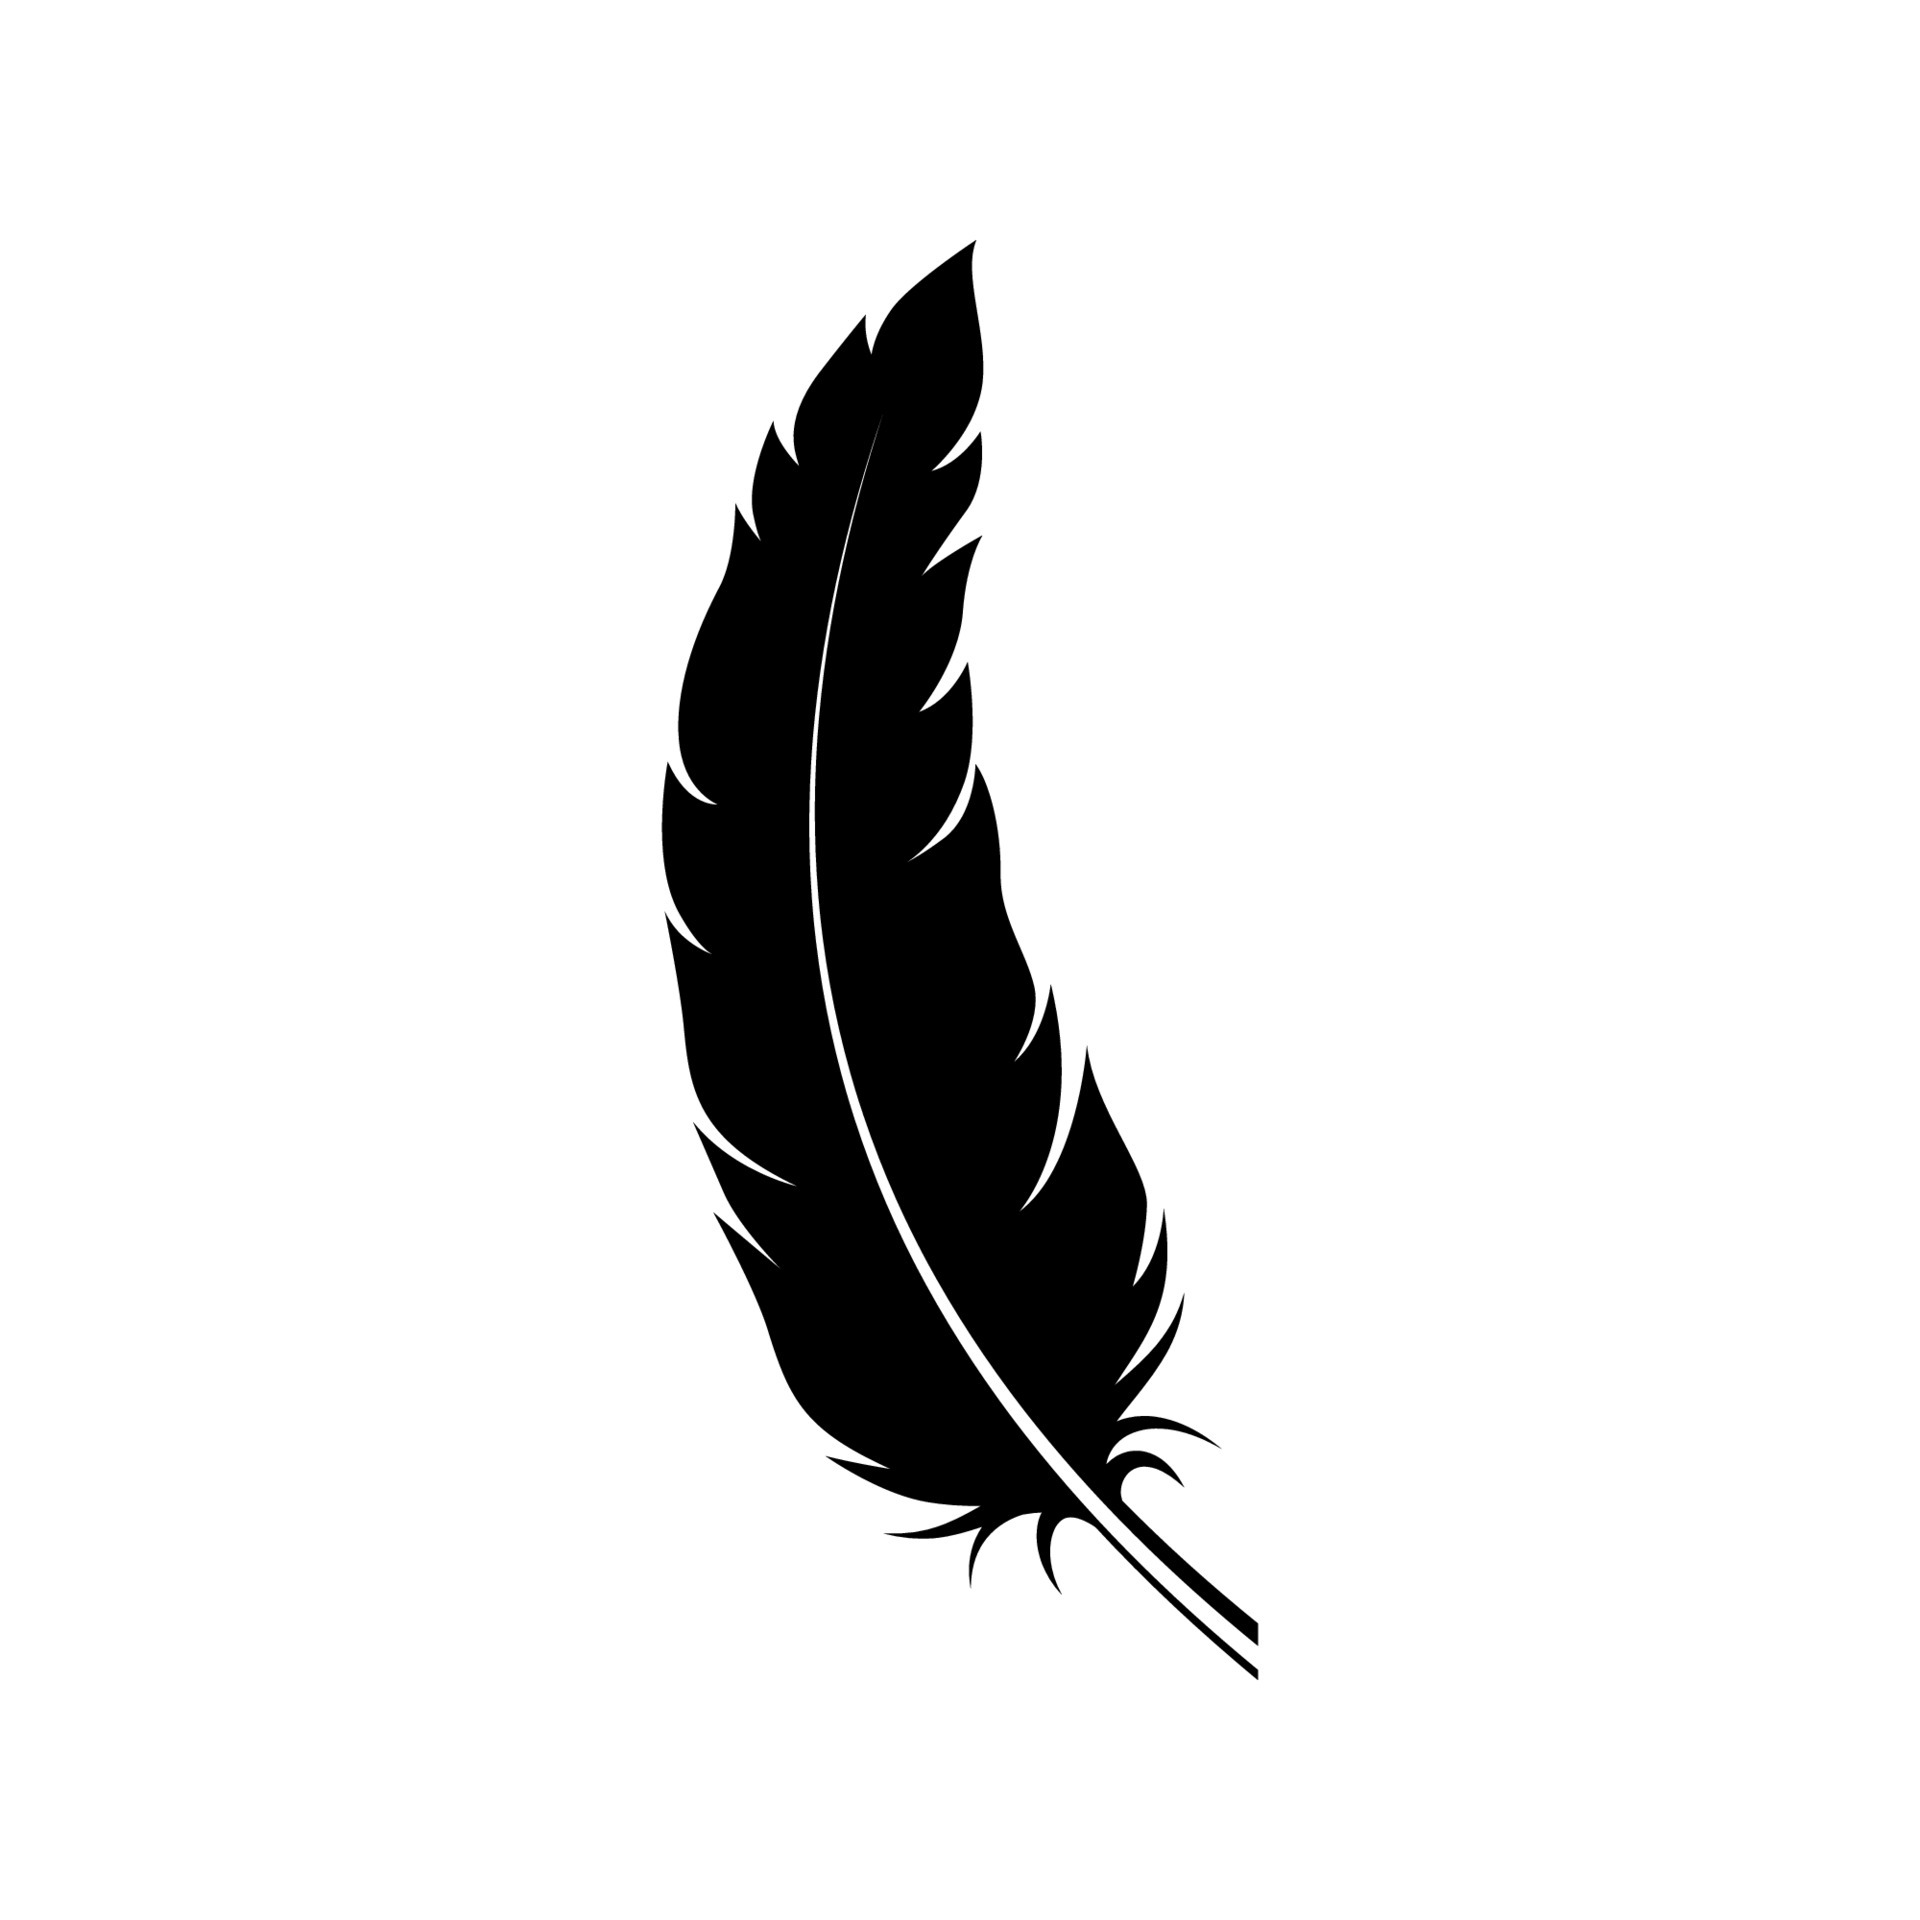 https://static.vecteezy.com/system/resources/previews/006/297/846/original/feather-isolated-on-white-background-free-vector.jpg